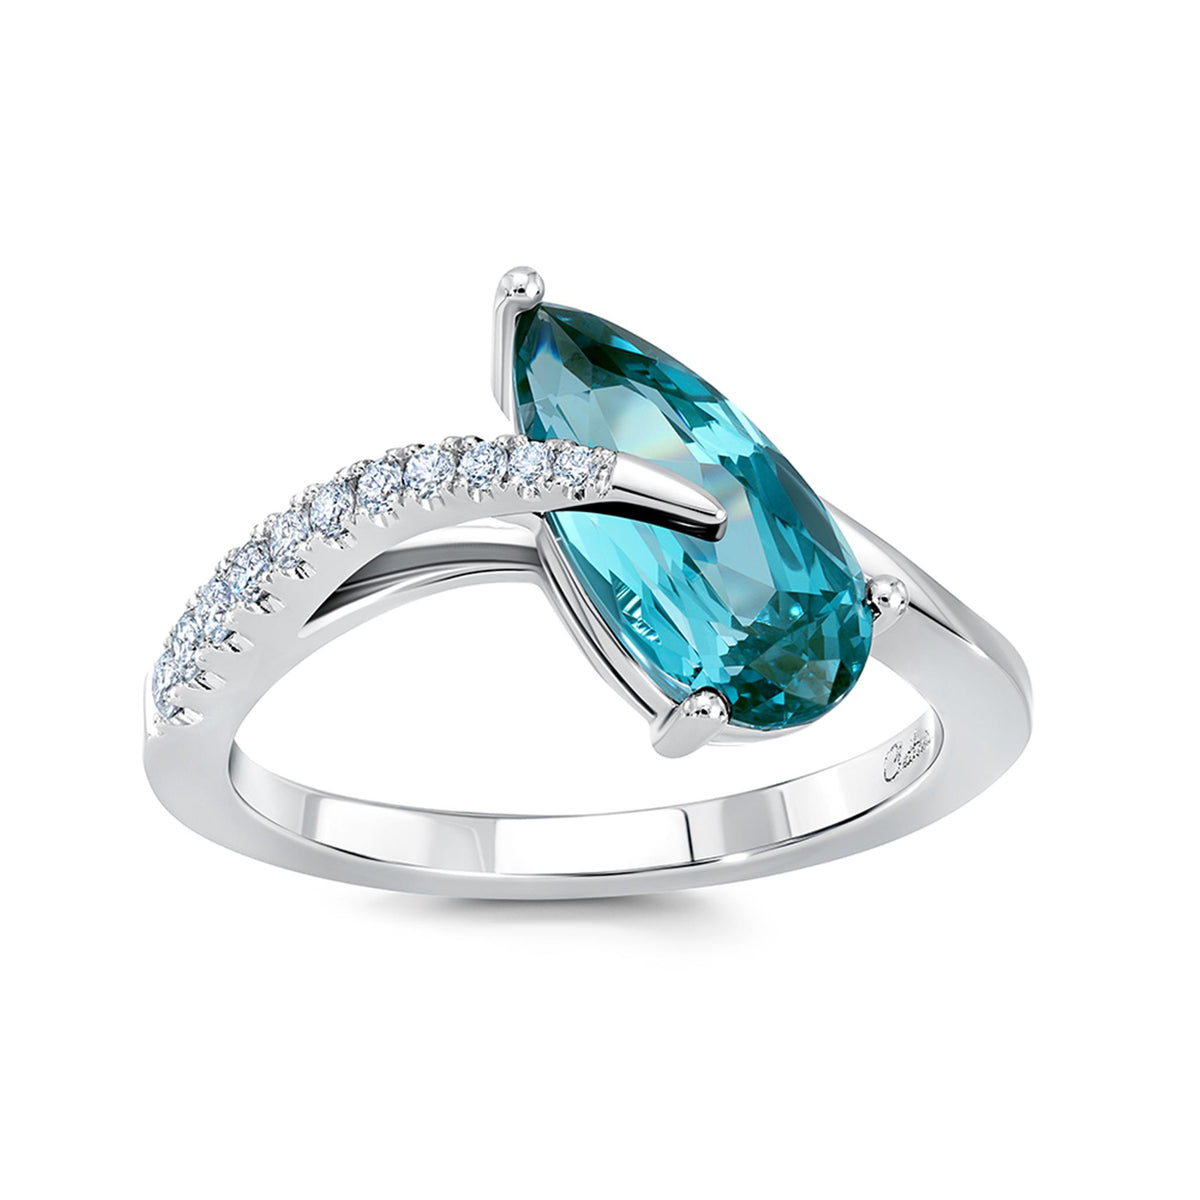 14Kt White Gold Ring With 2.51ct Chatham Lab Created Paraiba-Colored Spinel